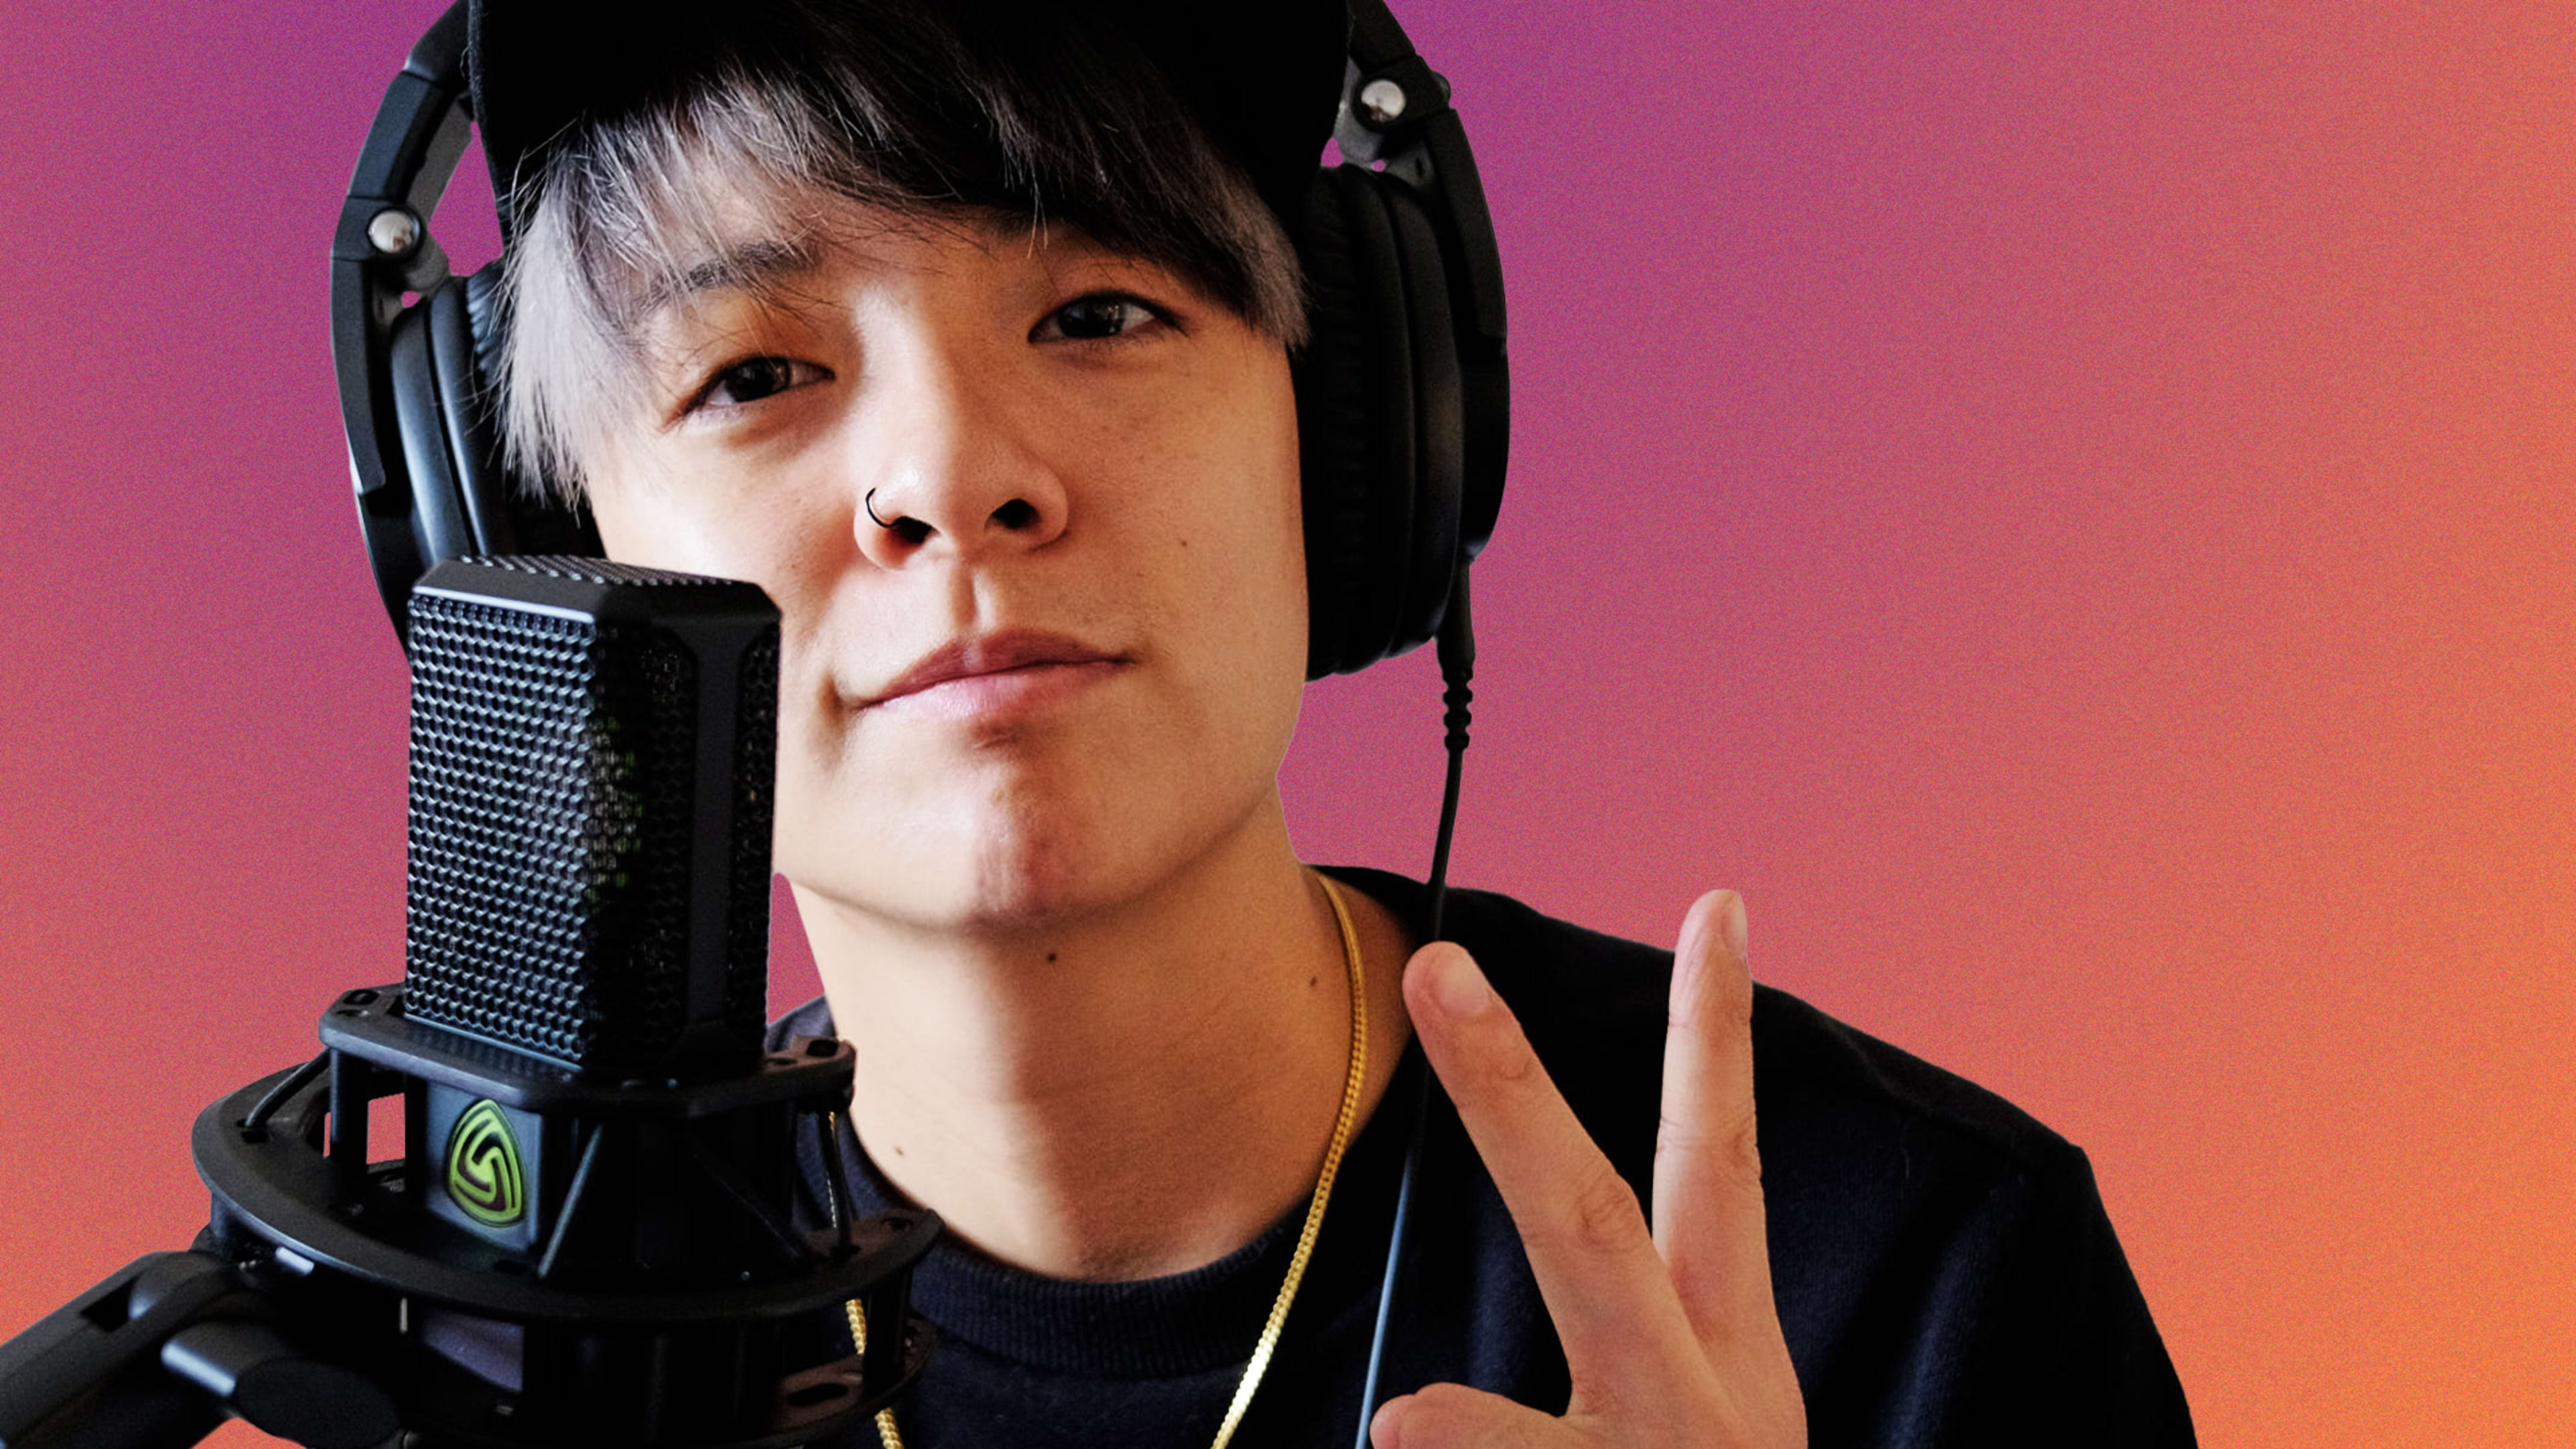 K-pop idol Amber Liu wants you to learn Korean with her via language learning app Drops